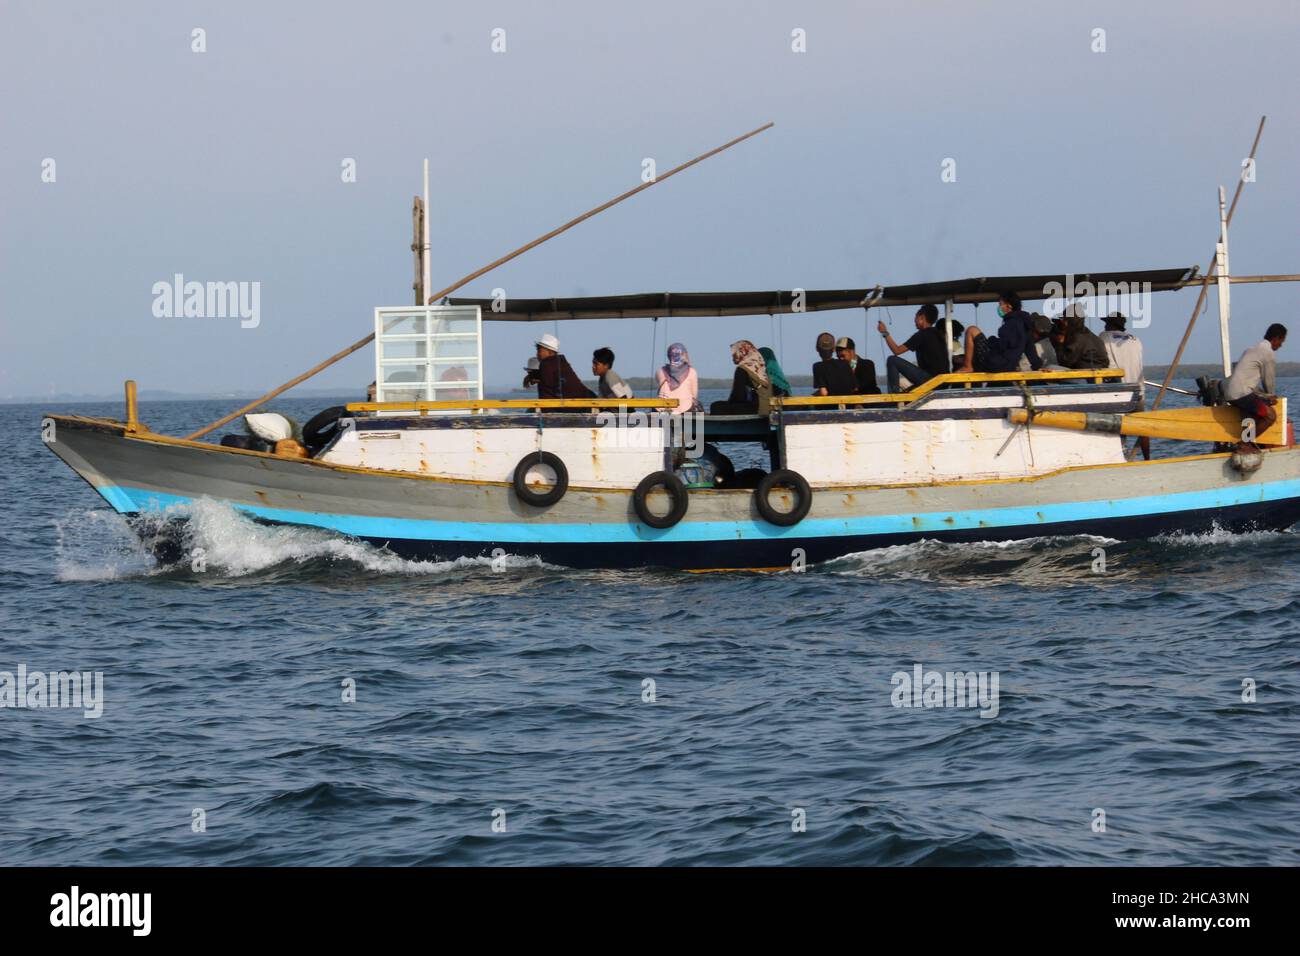 a motorized wooden boat takes its passengers to a small island near the main island of one of the islands in Indonesia Stock Photo